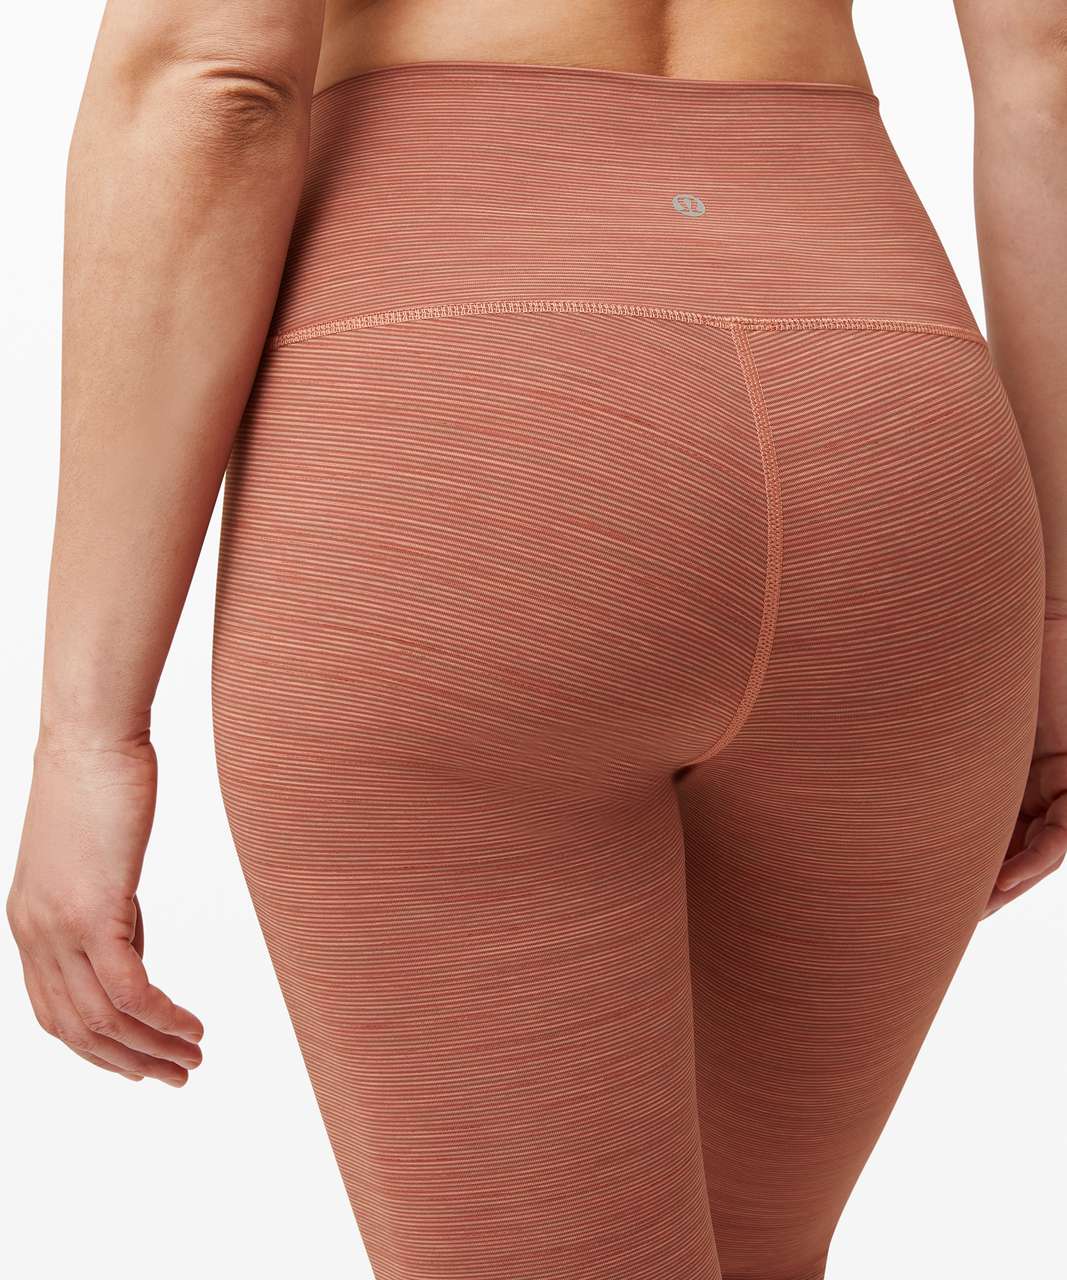 Lululemon Wunder Under High-Rise Tight 25" *Luxtreme - Wee Are From Space Rustic Coral